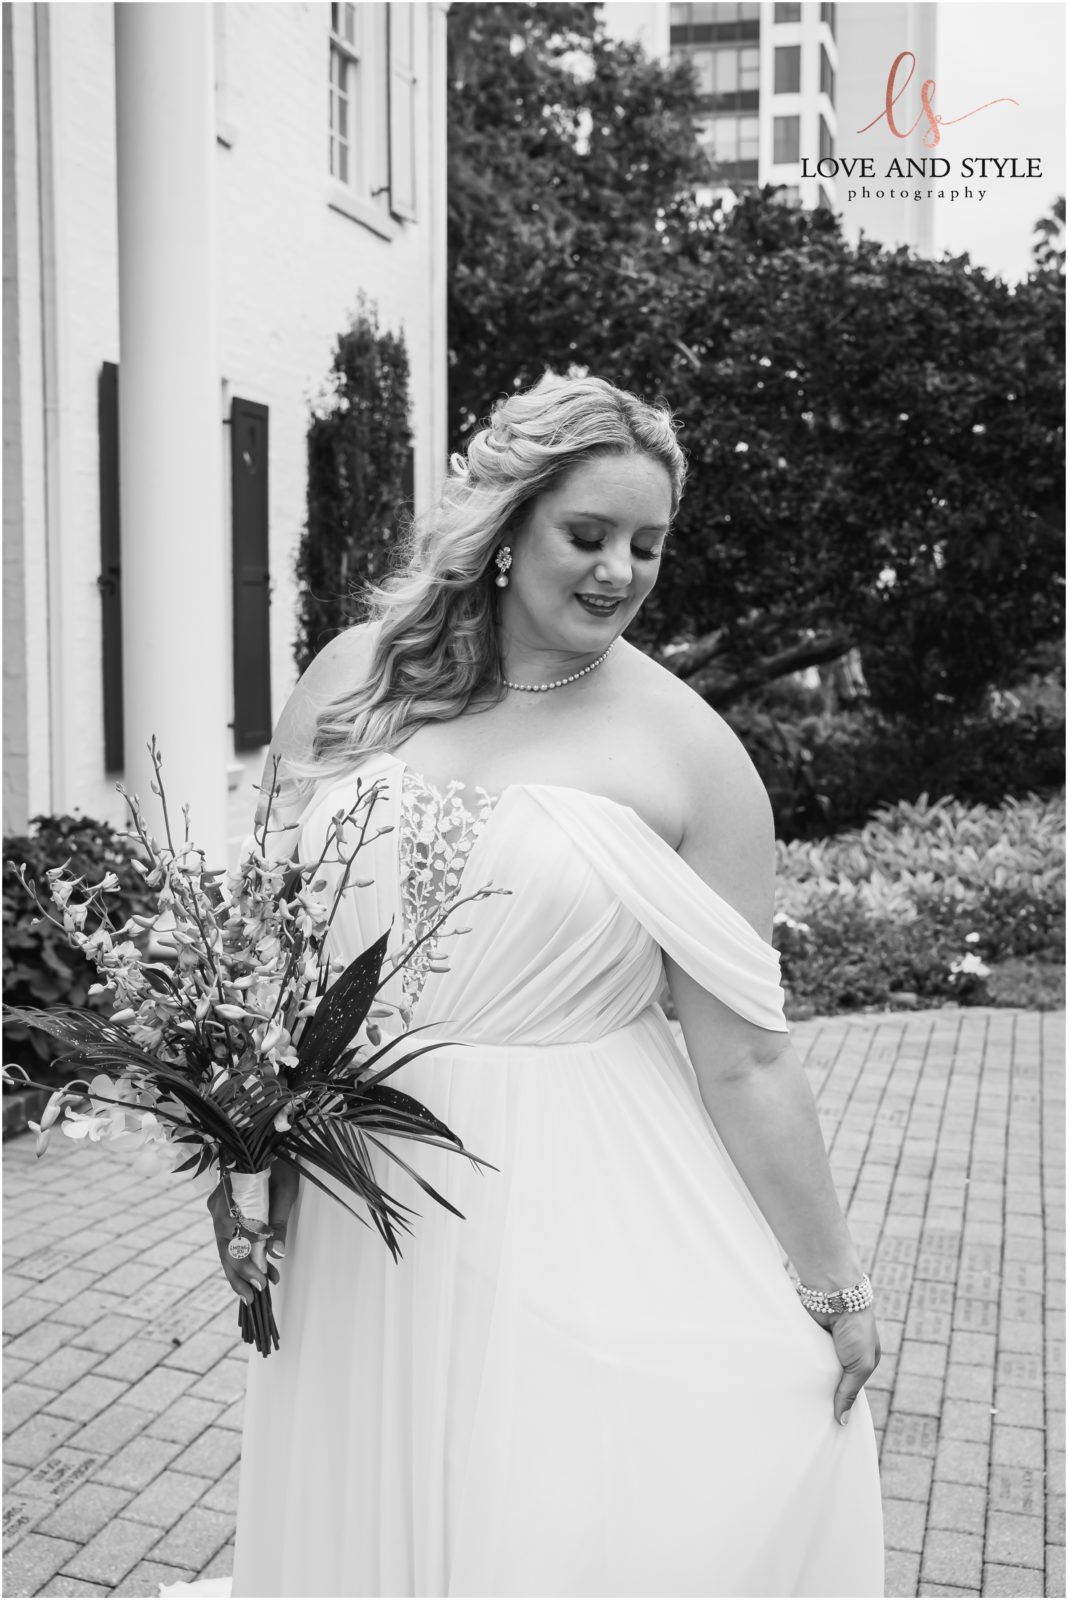 Bridal Portrait in black and white at Selby Botanical Gardens in Sarasota